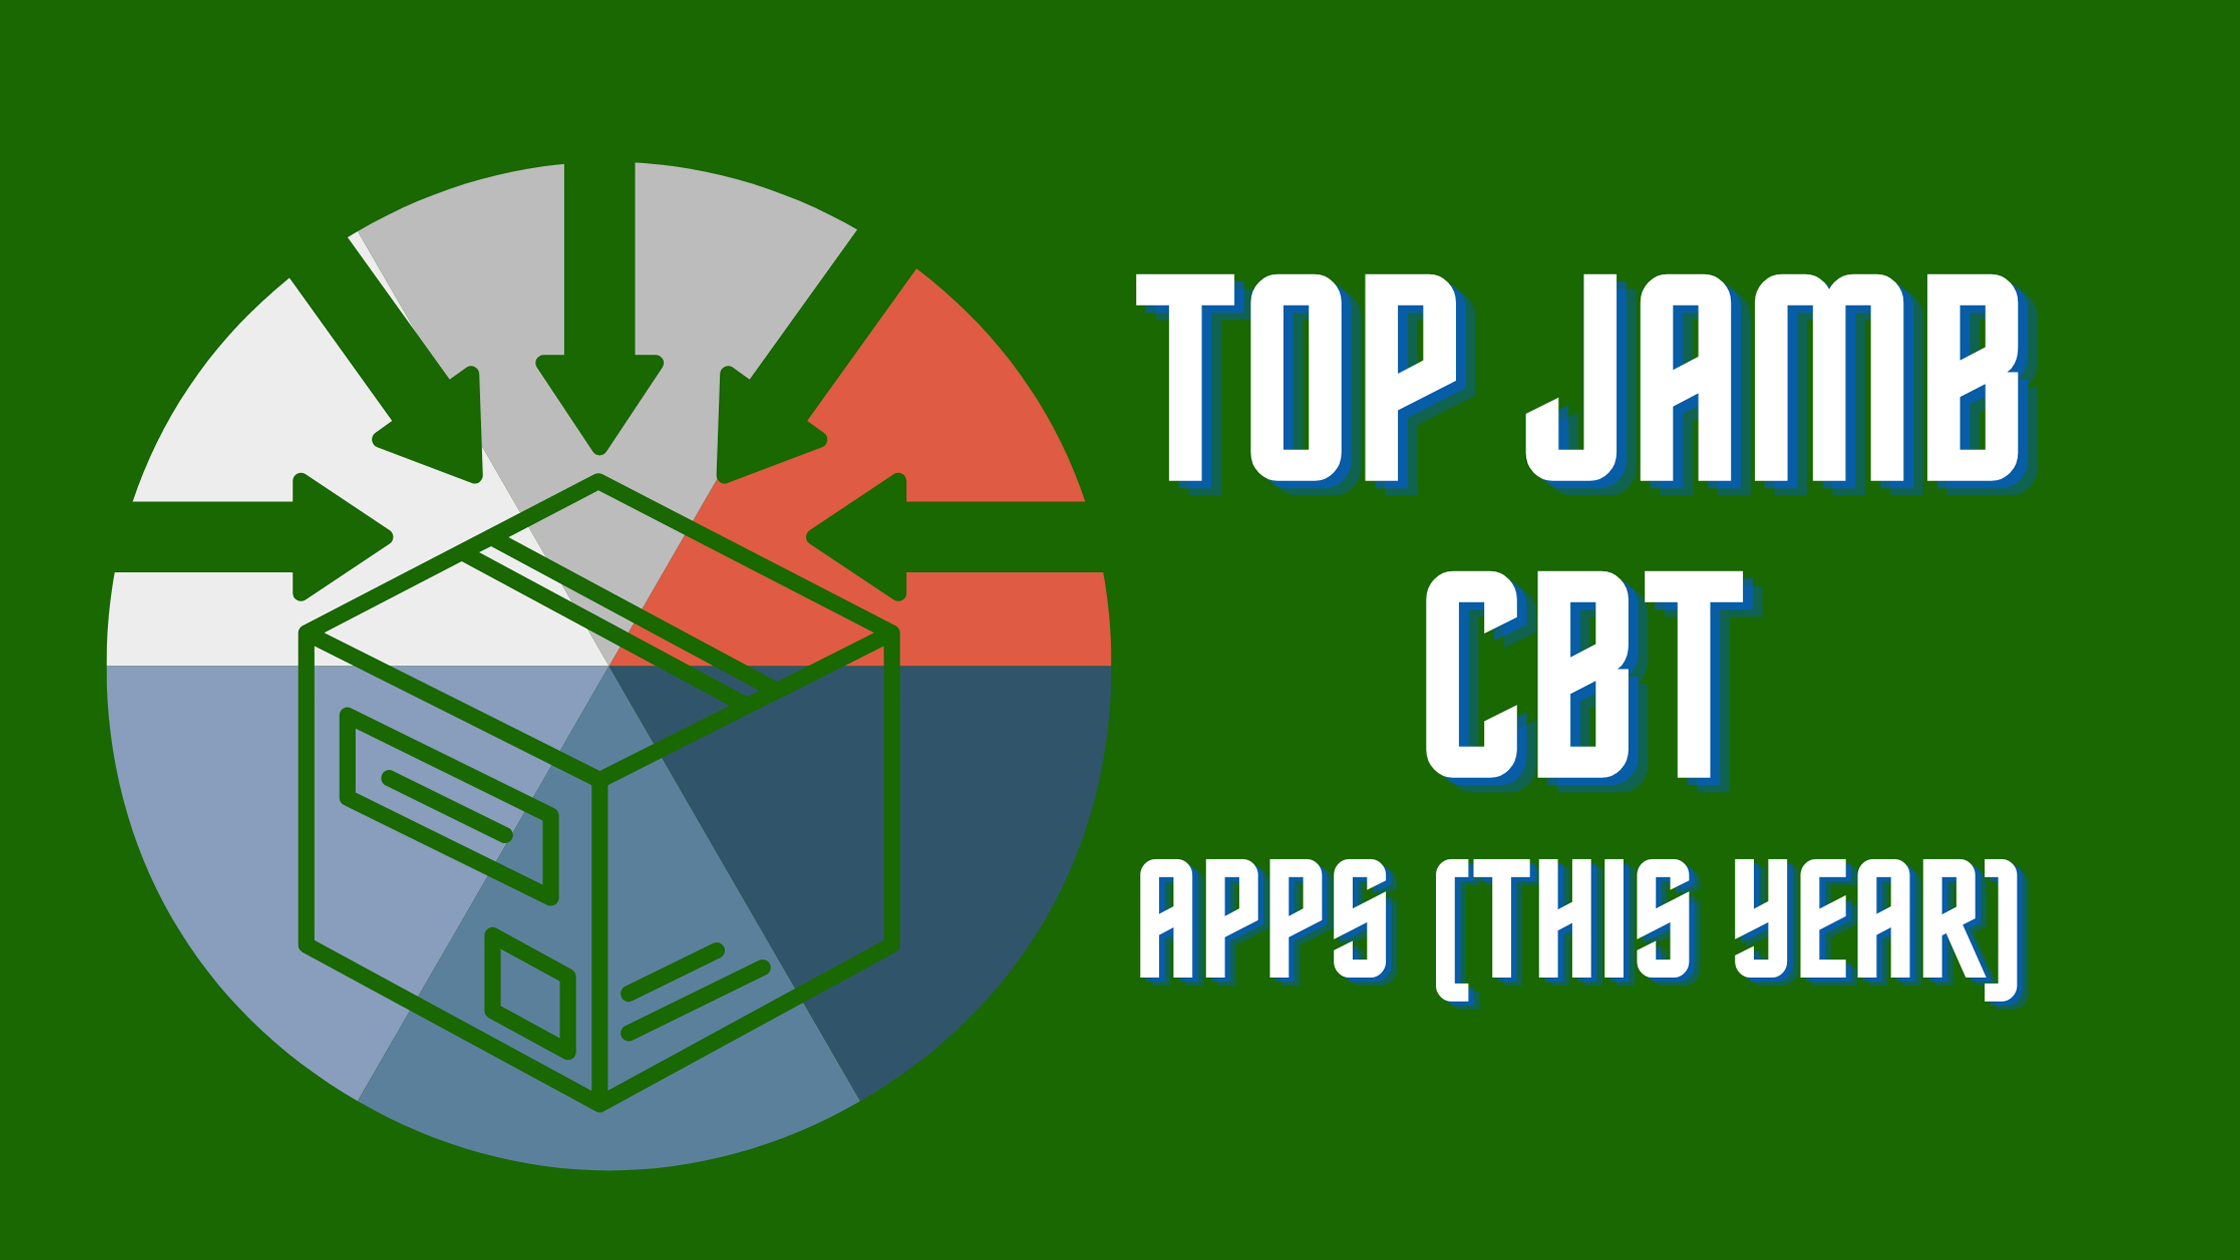 Read more about the article Jamb cbt apps to pass JAMB in 2022 (listed & compared)